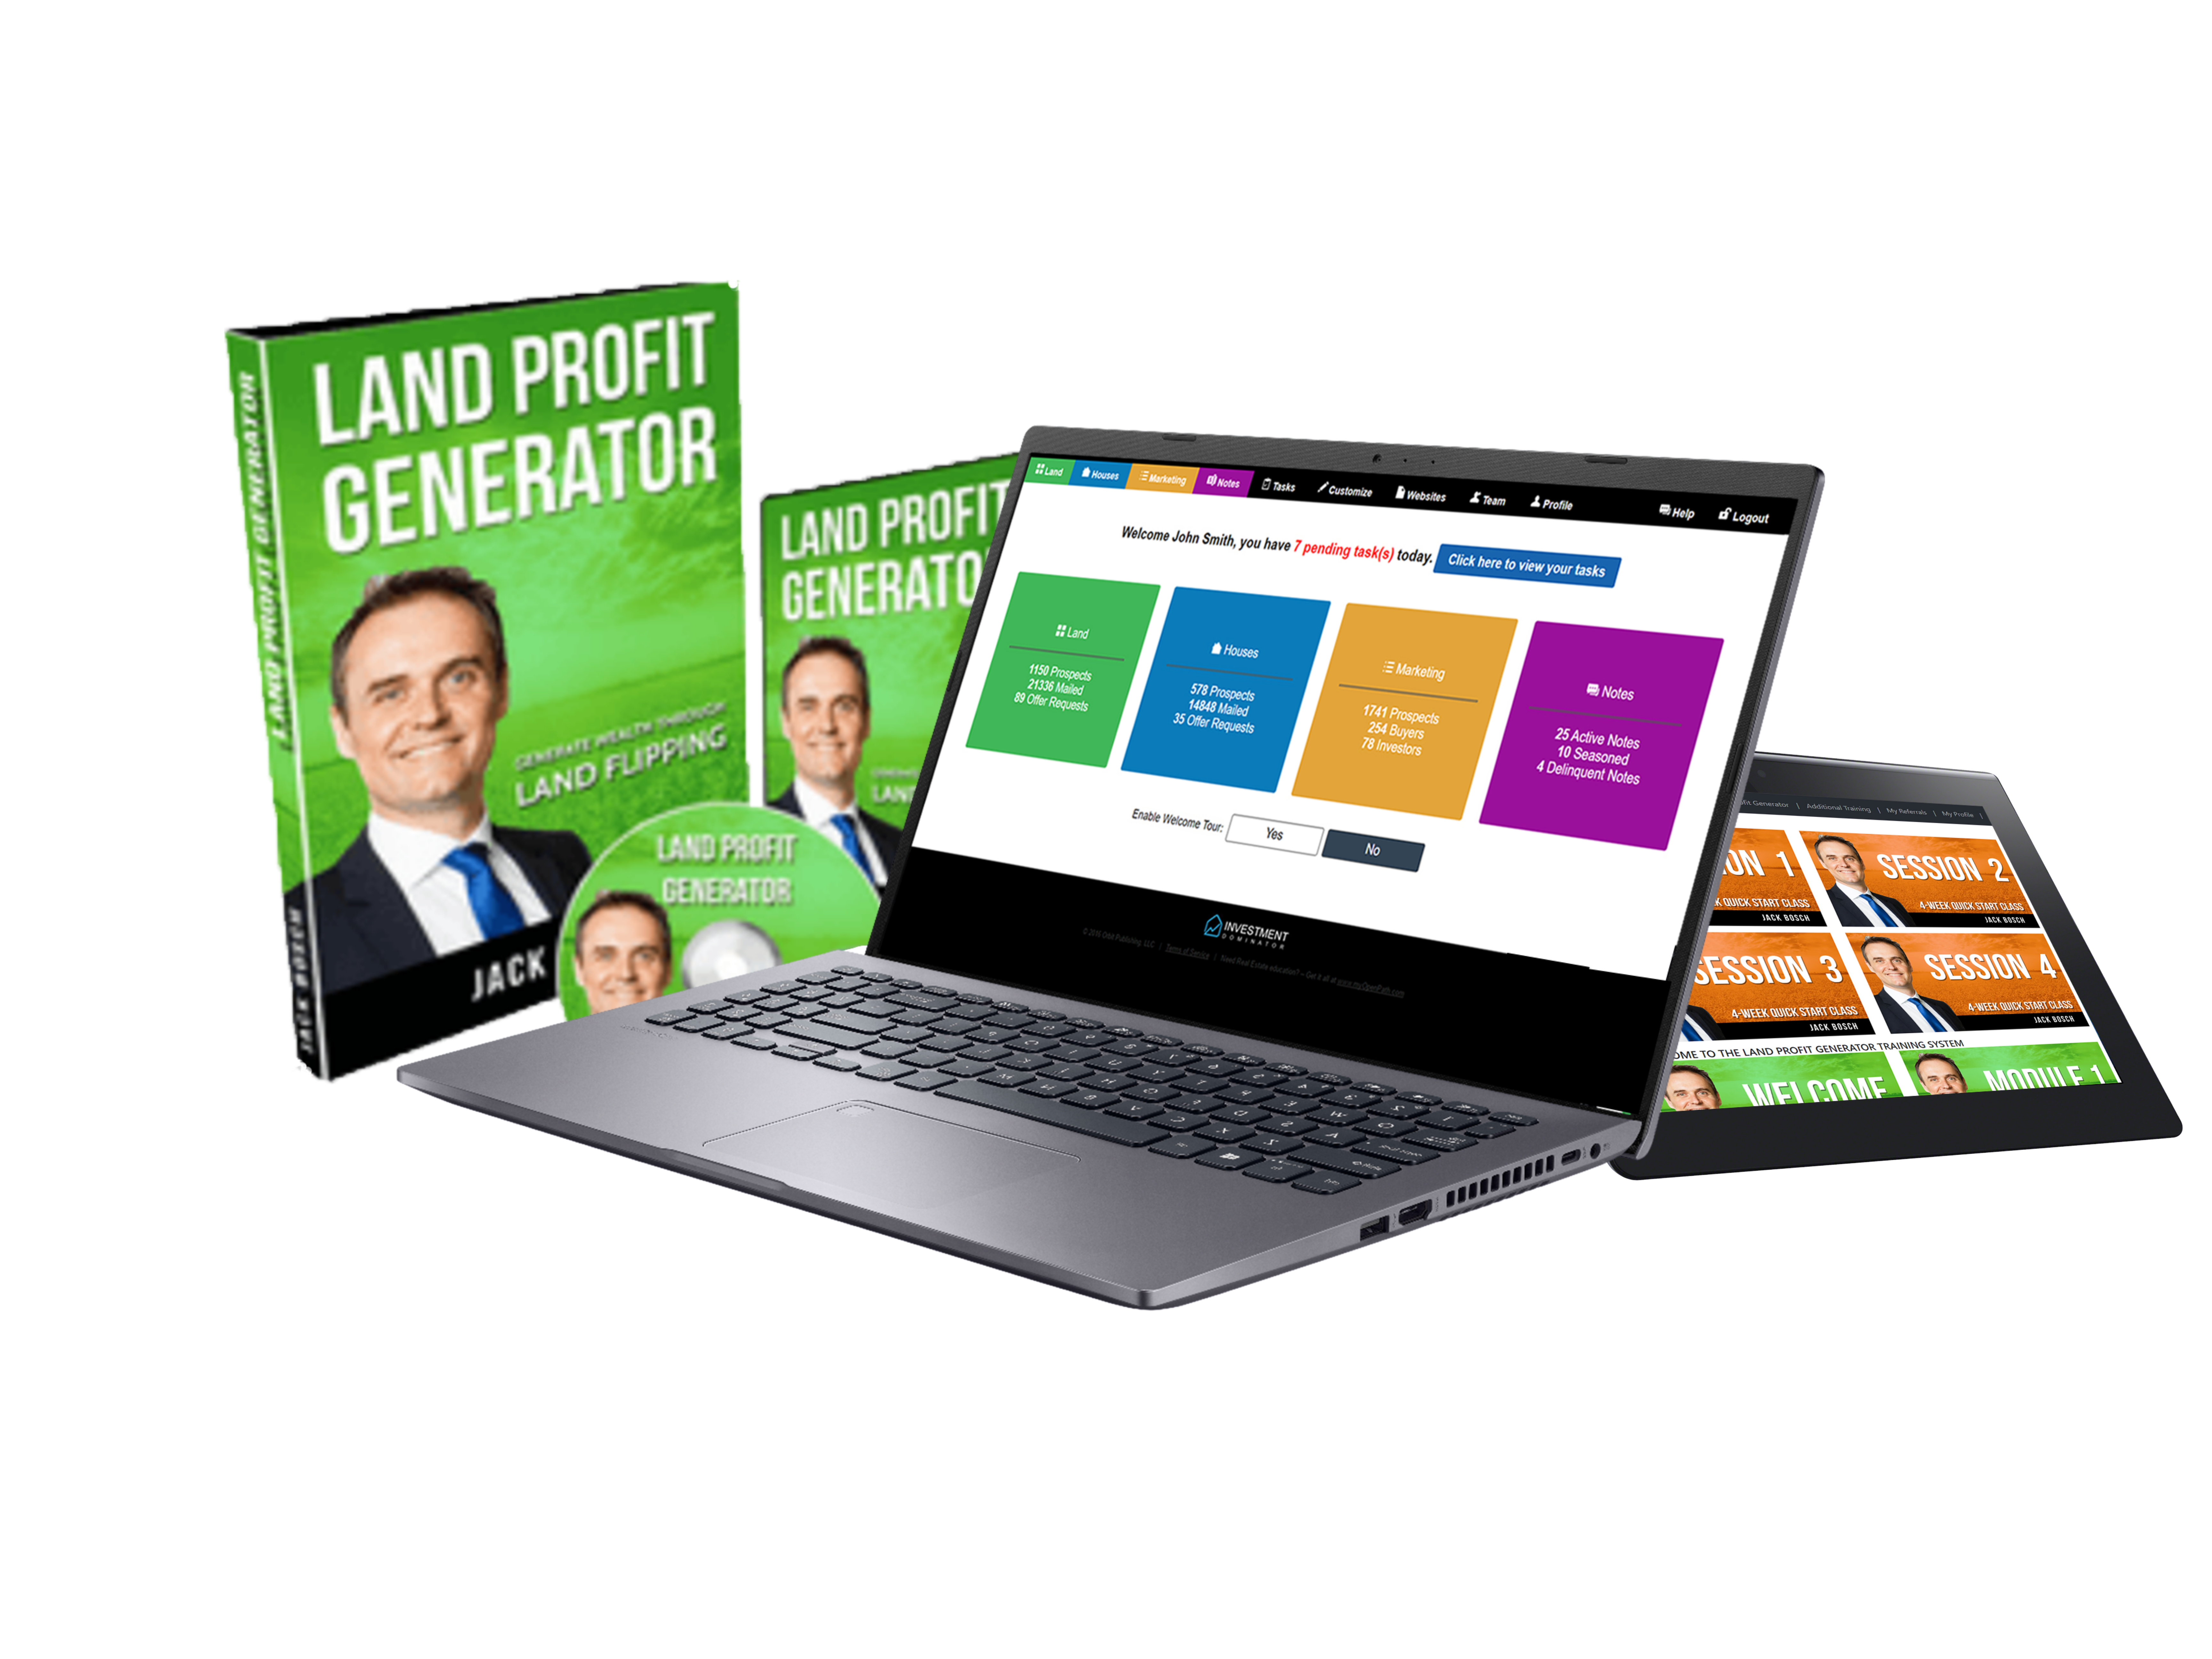 The Land Profit Generator - Jack and Michelle Bosch